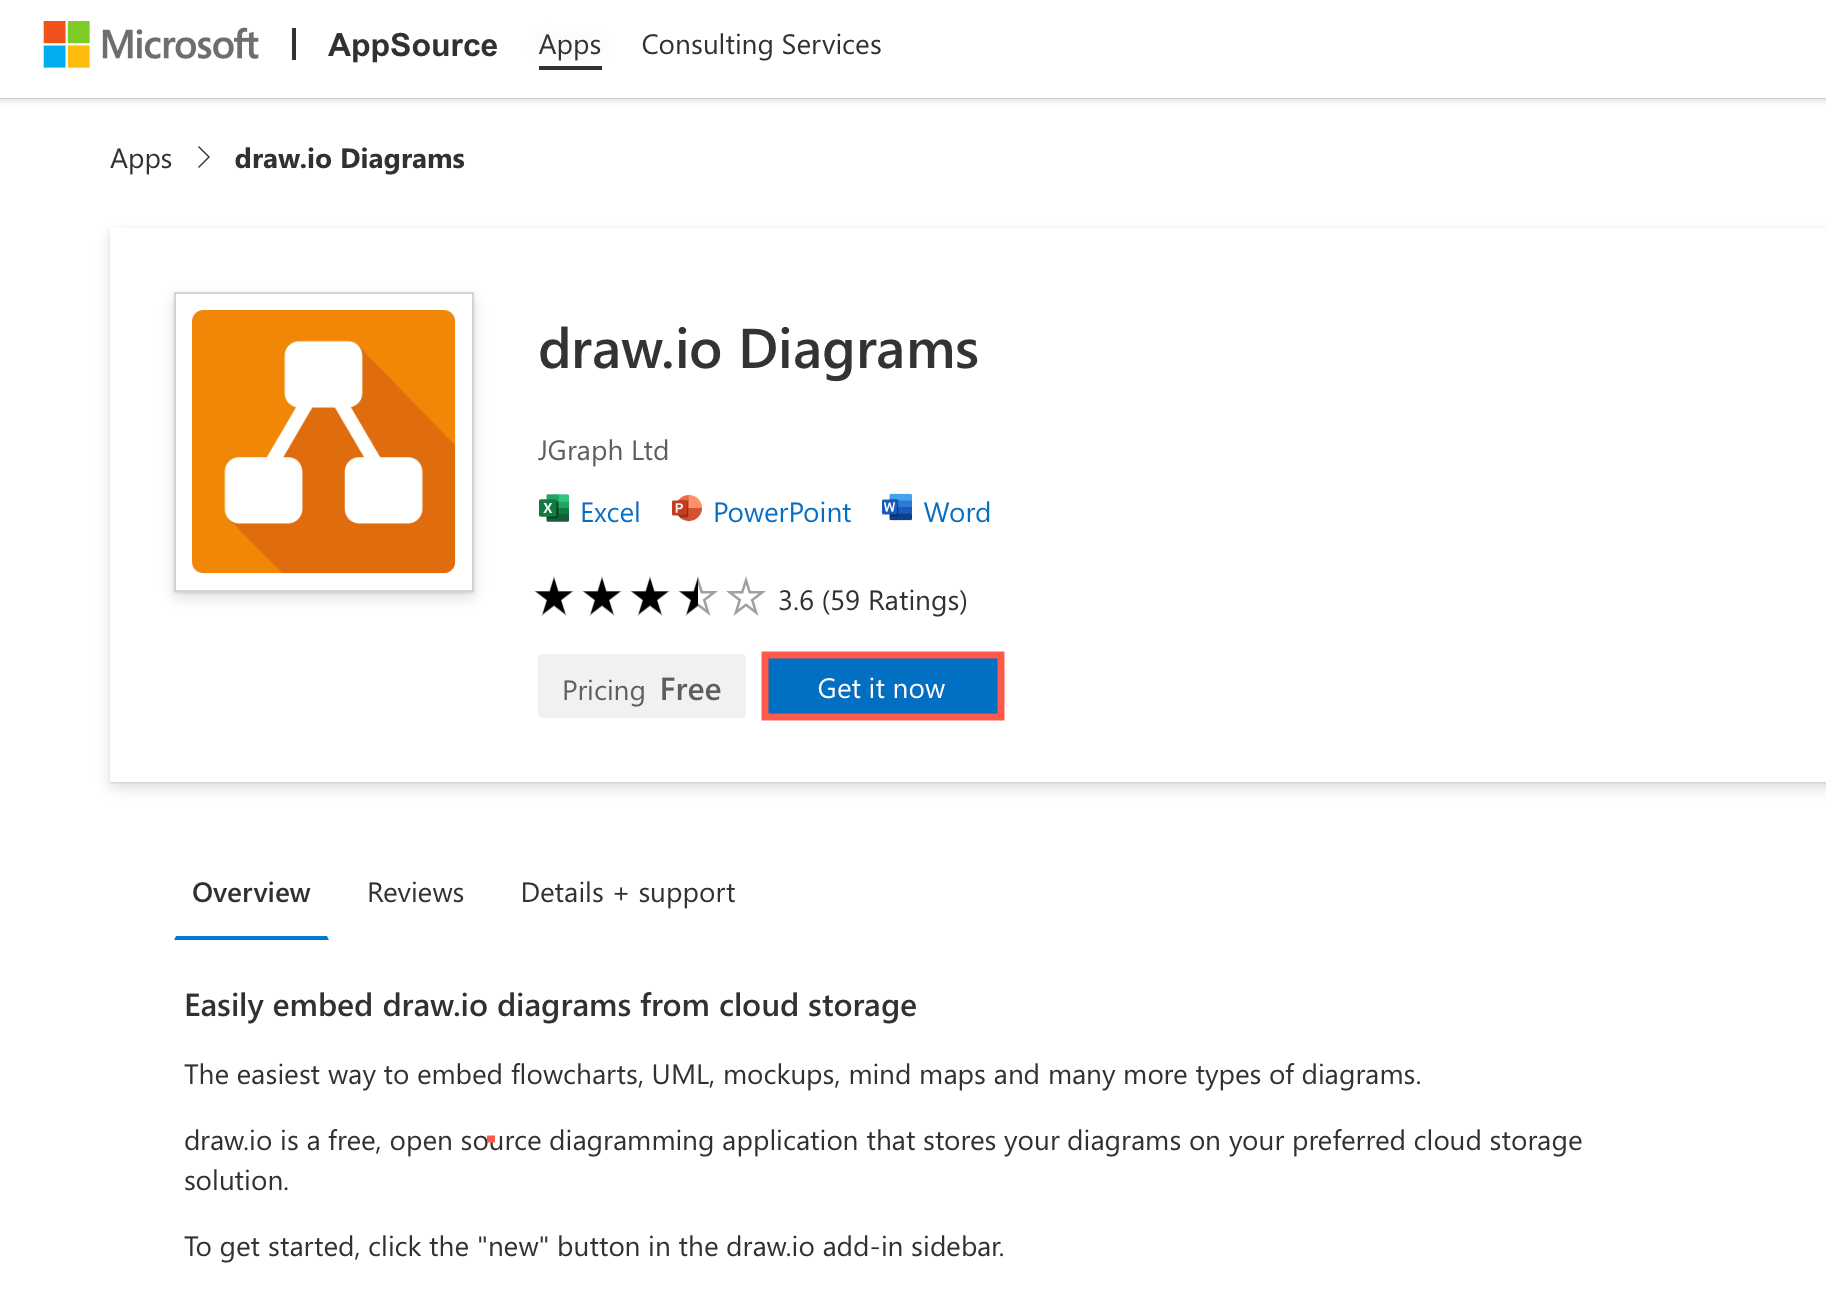 Install the draw.io diagrams add-in via Microsoft and AppSource